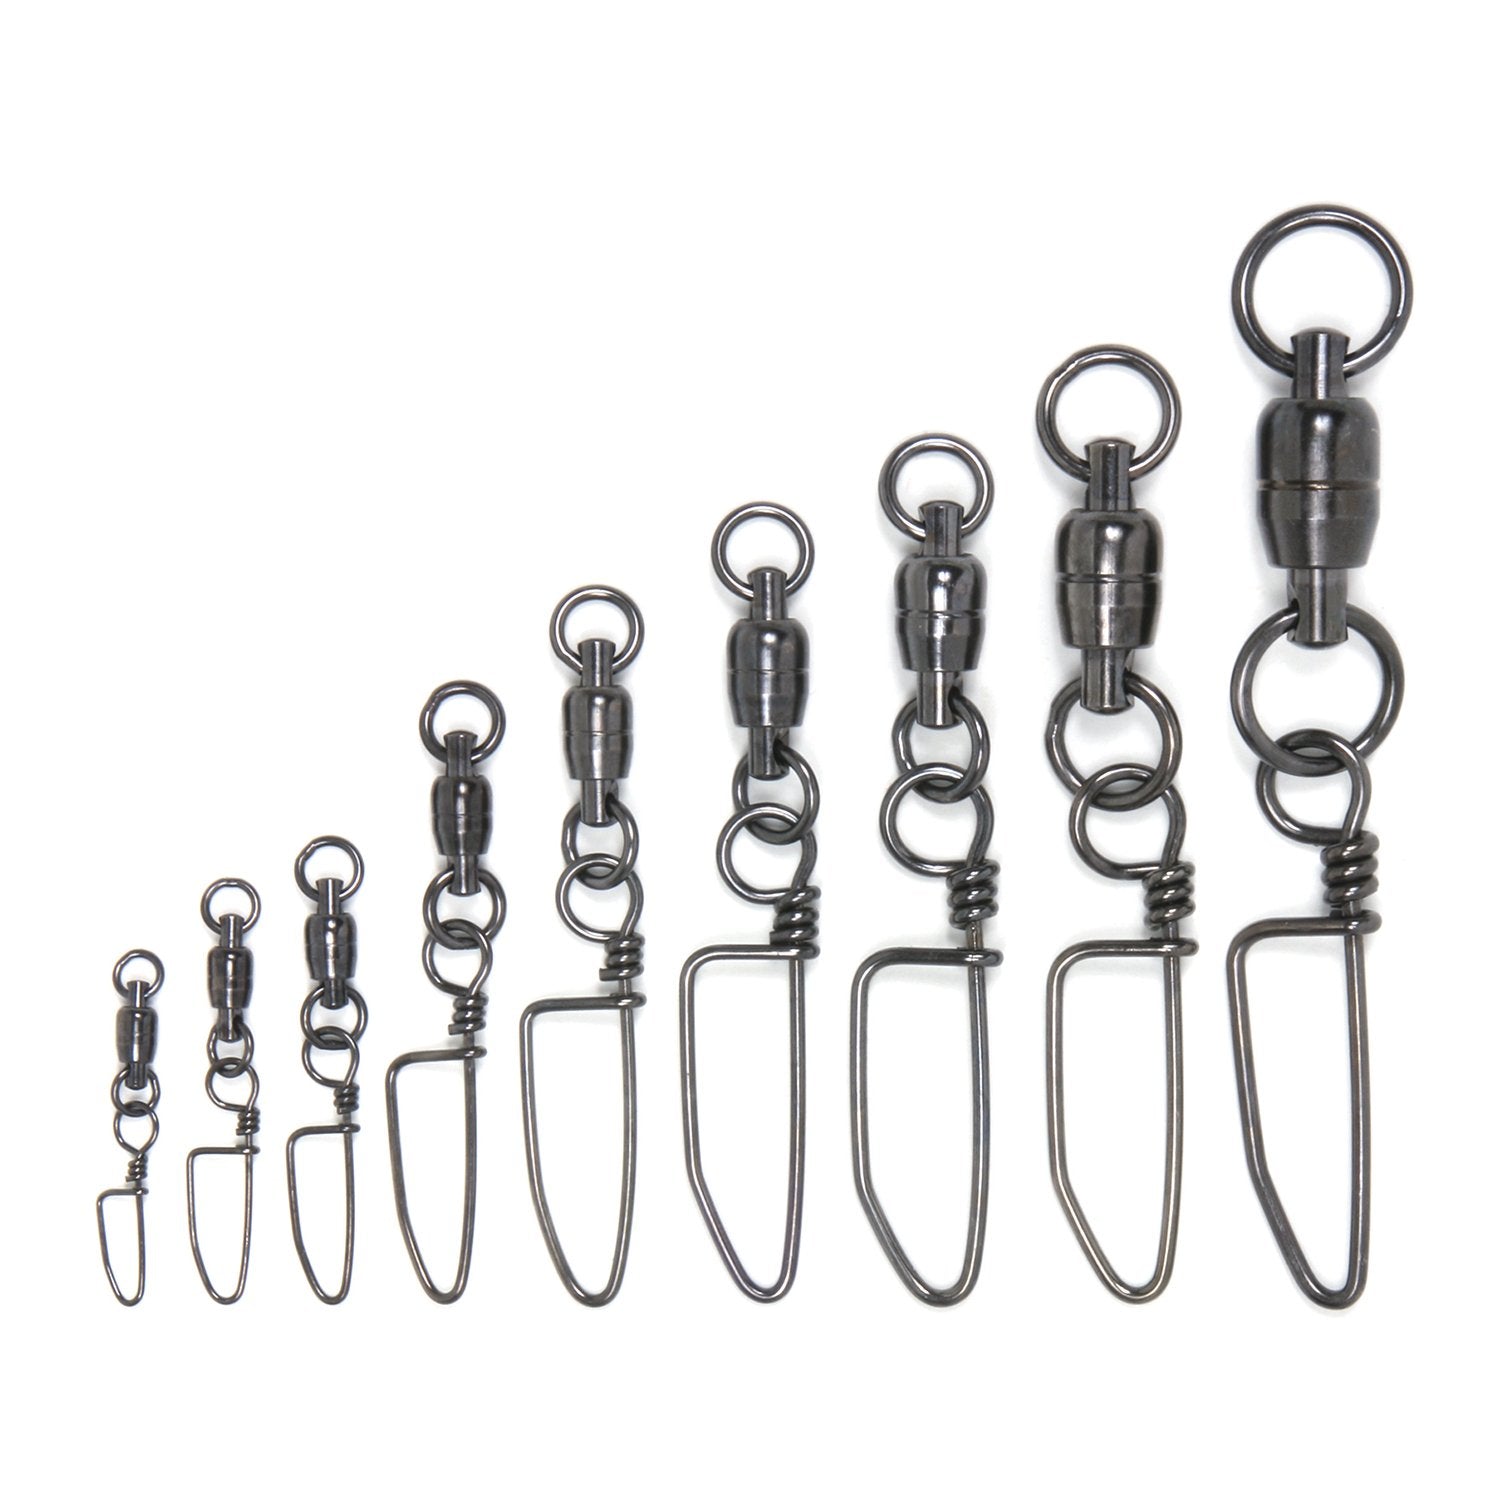 310LB/141KG 120PCS Ball Bearing Swivels Stainless Steel Solid